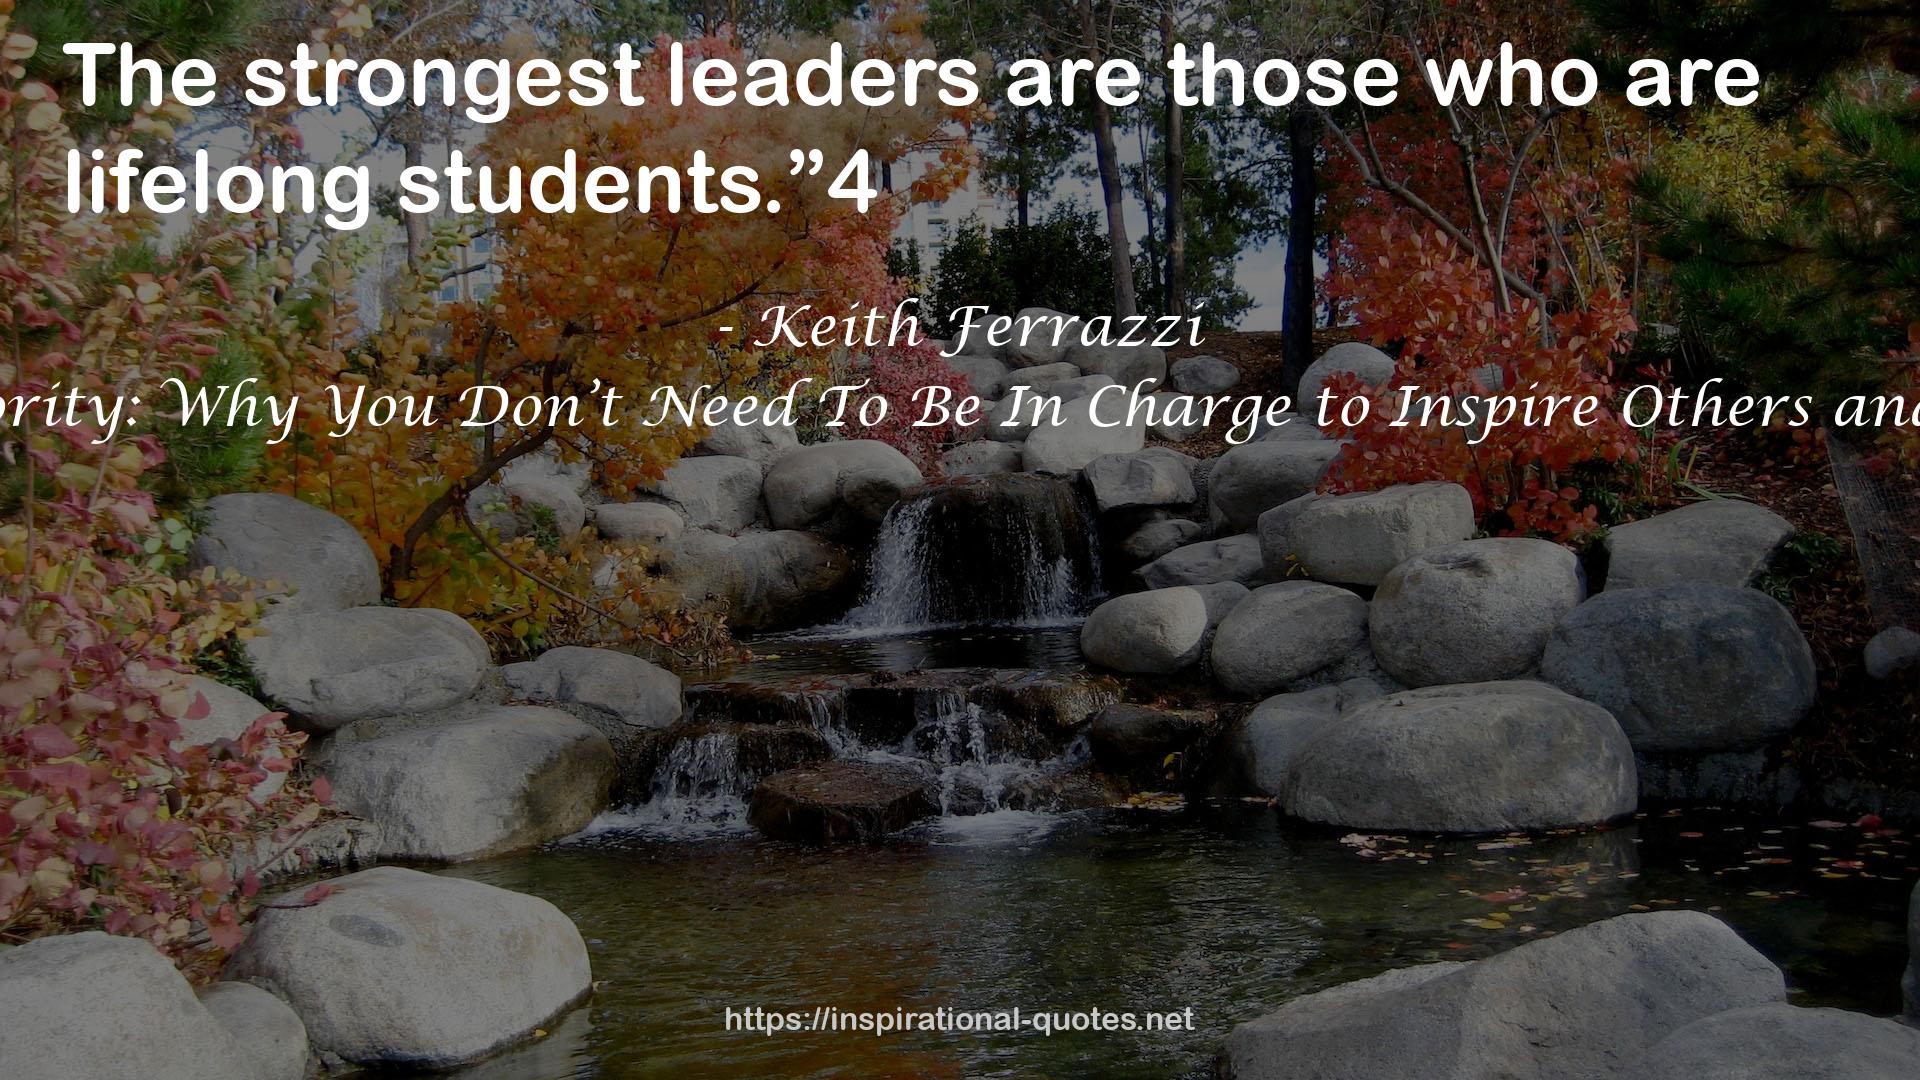 Leading Without Authority: Why You Don’t Need To Be In Charge to Inspire Others and Make Change Happen QUOTES